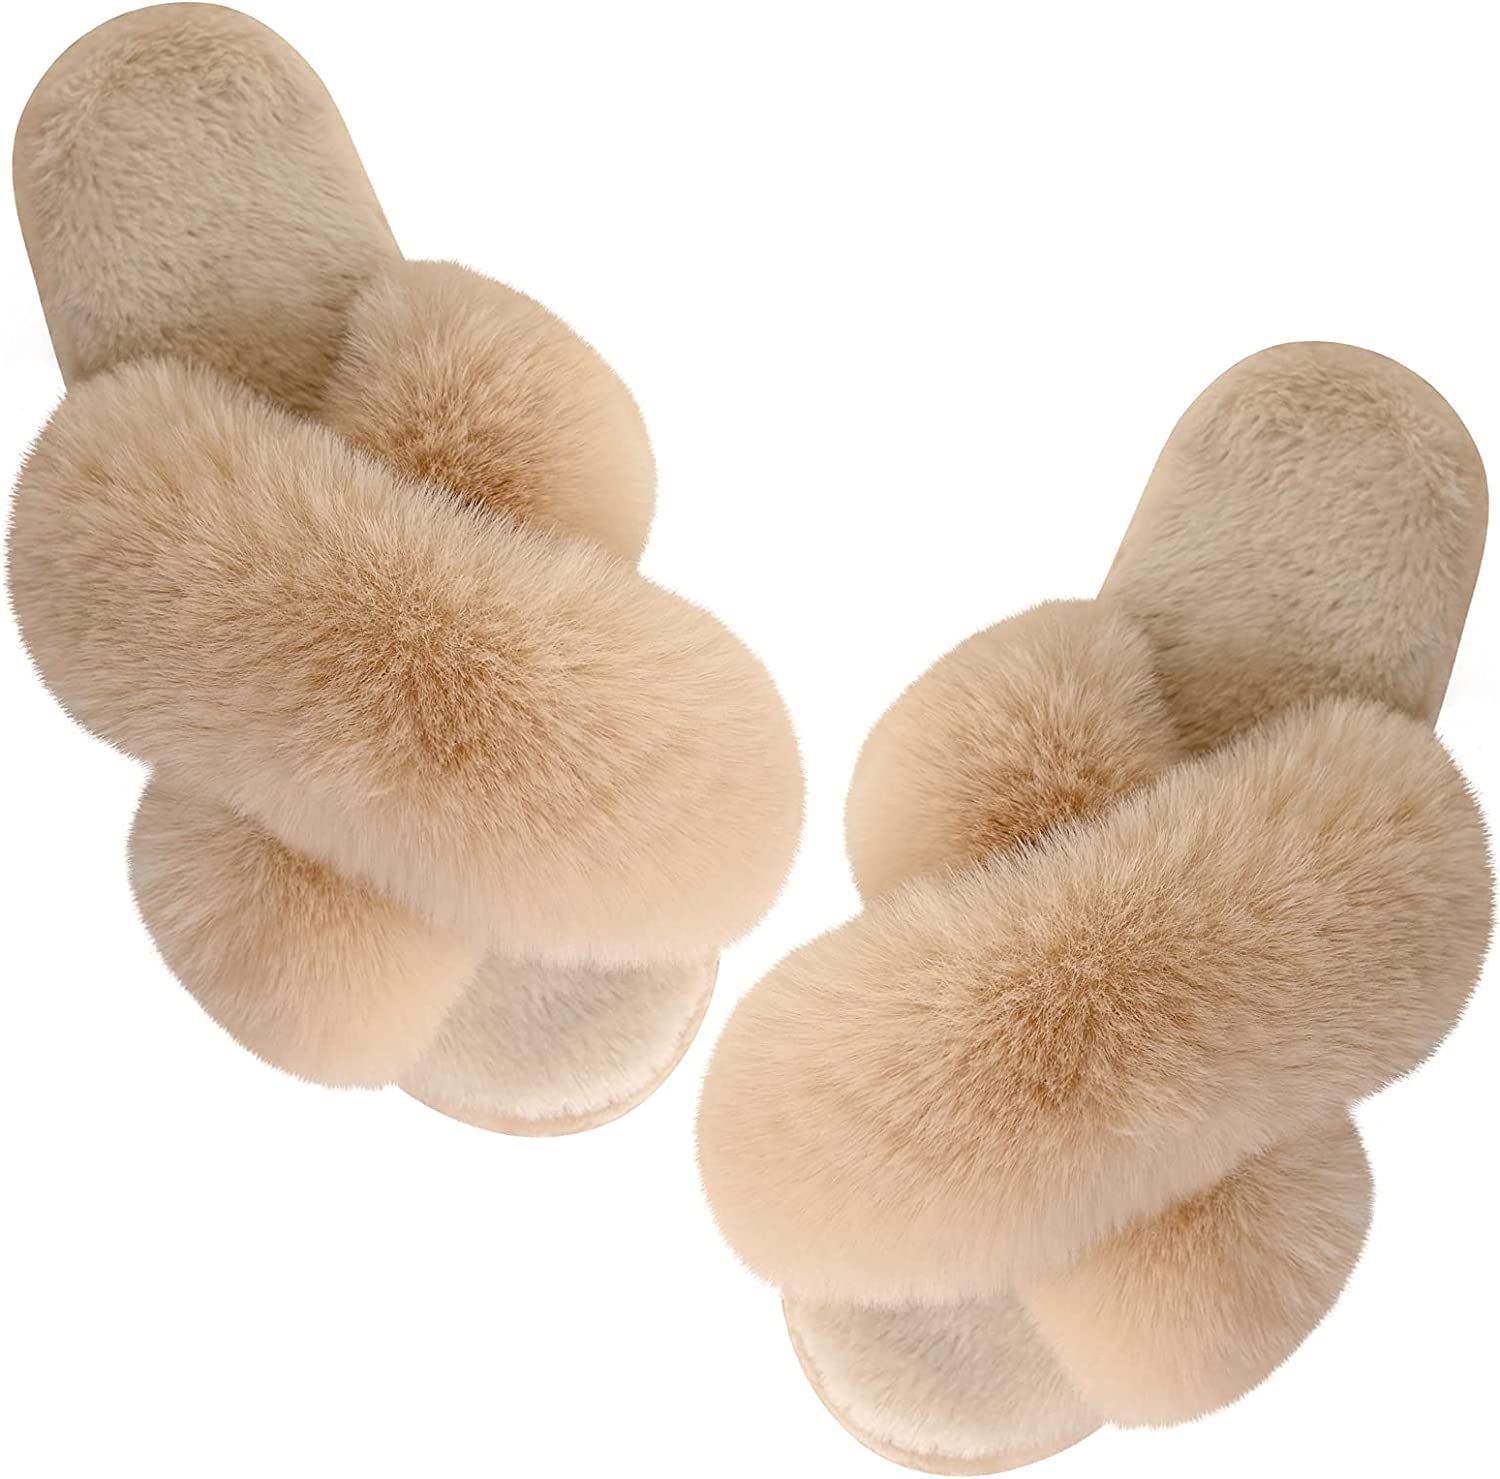 Women's Cross Band Slippers Fuzzy Soft House Slippers Plush Furry Warm Cozy Open Toe Fluffy Home ... | Amazon (US)